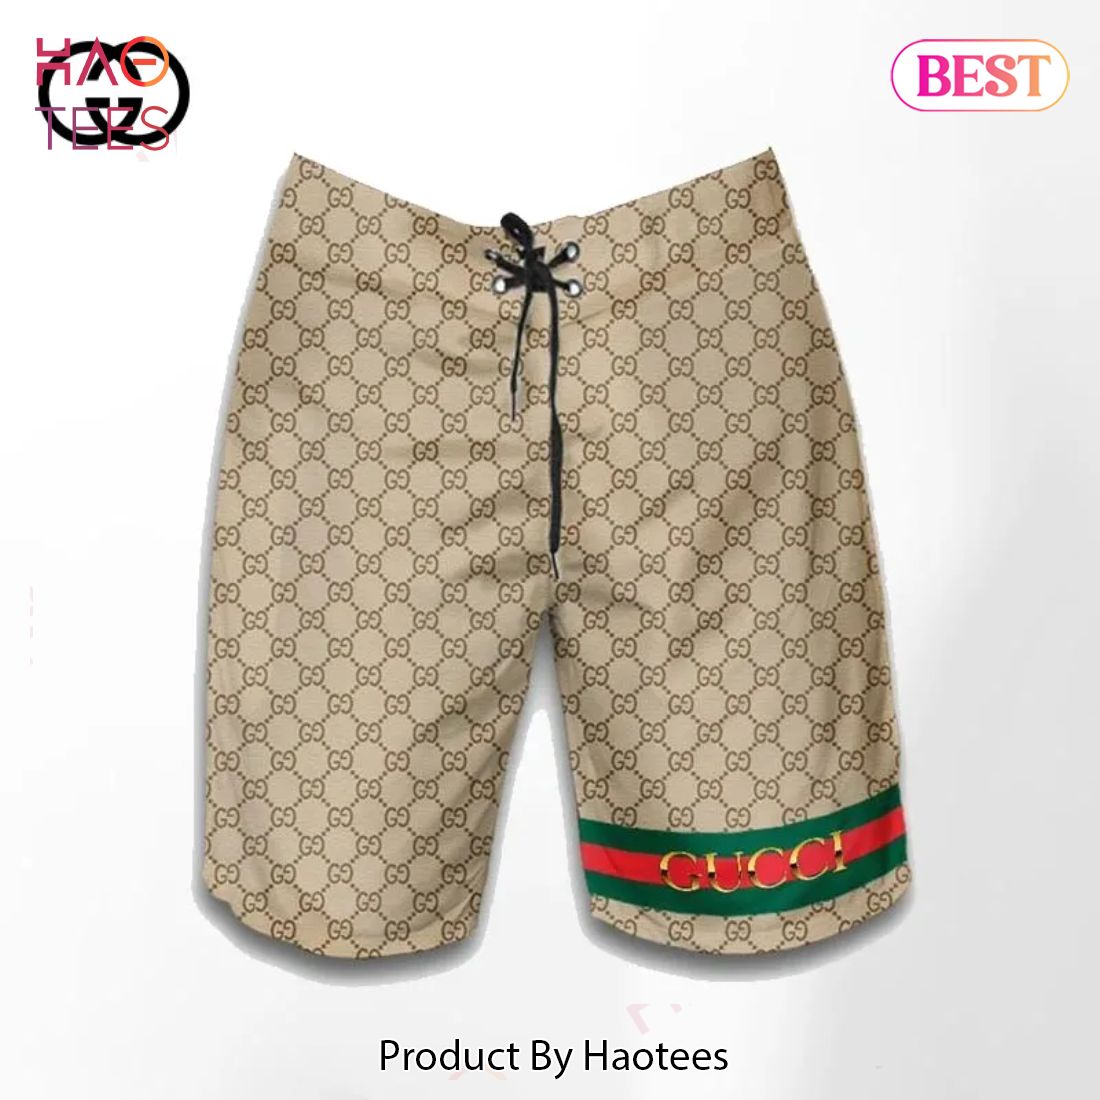 NEW FASHION] Gucci Luxury Pants All Over Print Shorts Men